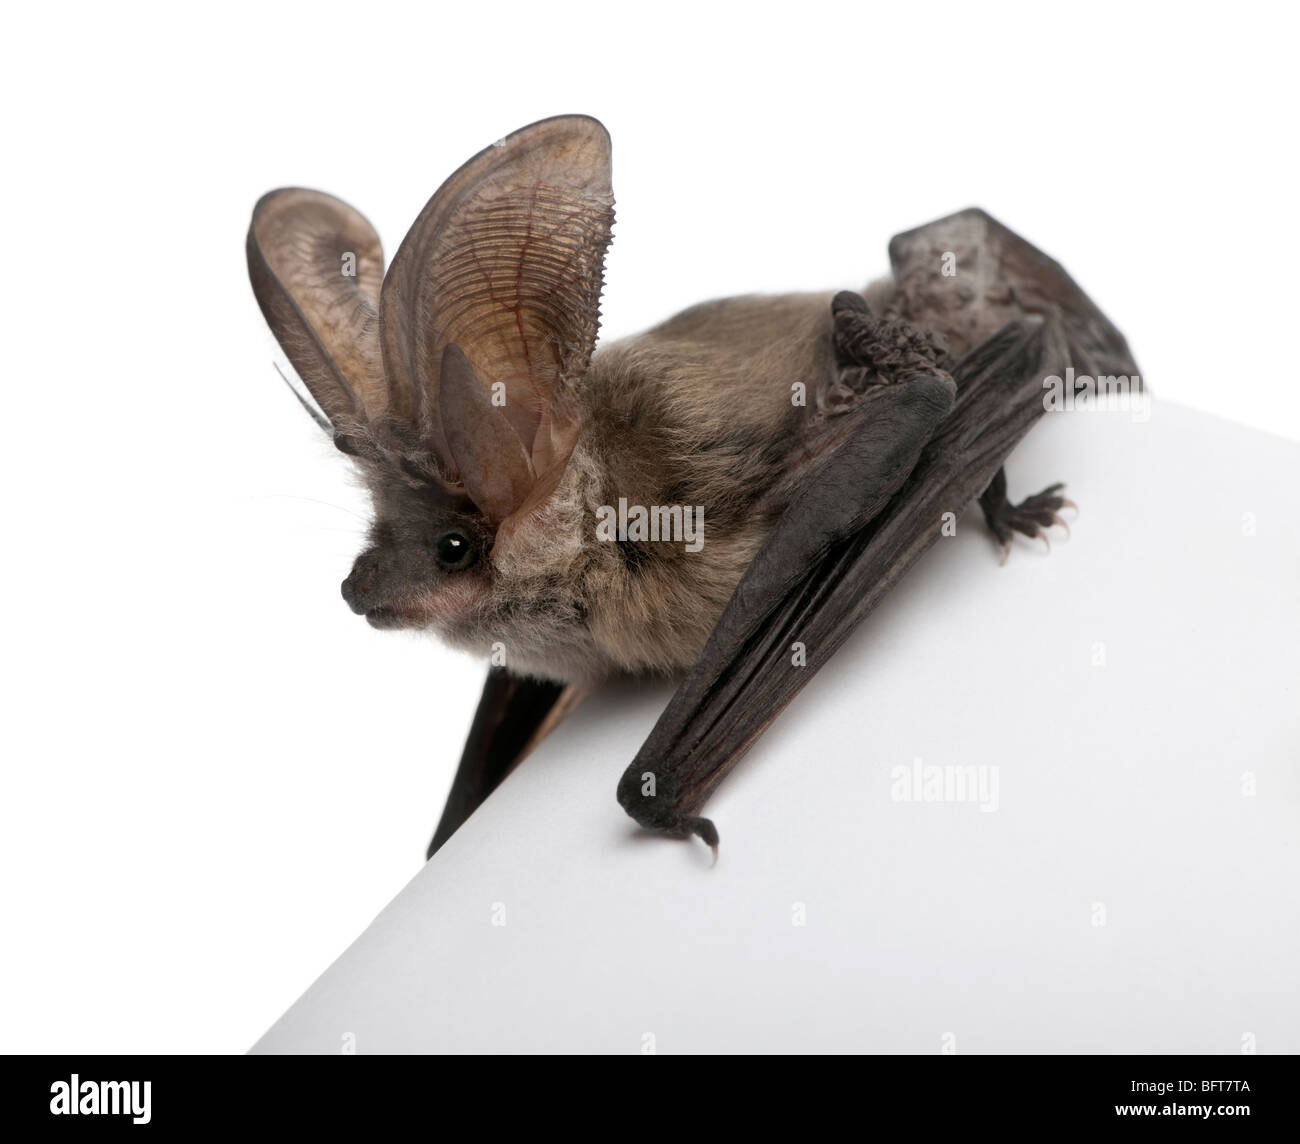 Grey long-eared bat, Plecotus astriacus, in front of white background, studio shot Stock Photo